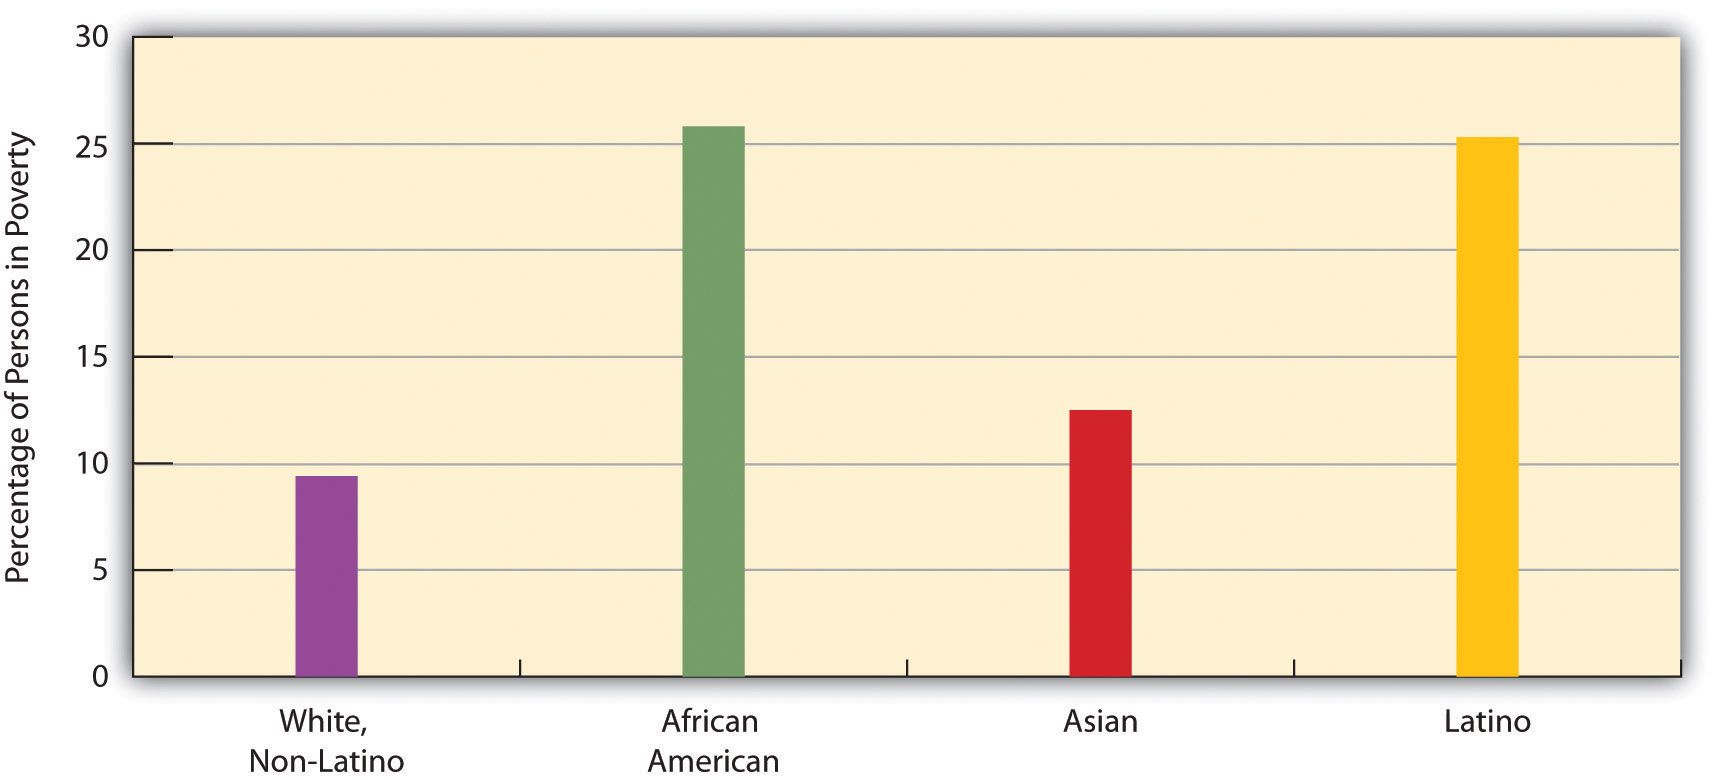 Race, Ethnicity, and Poverty, 2010 (Percentage of Each Group That Is Poor)